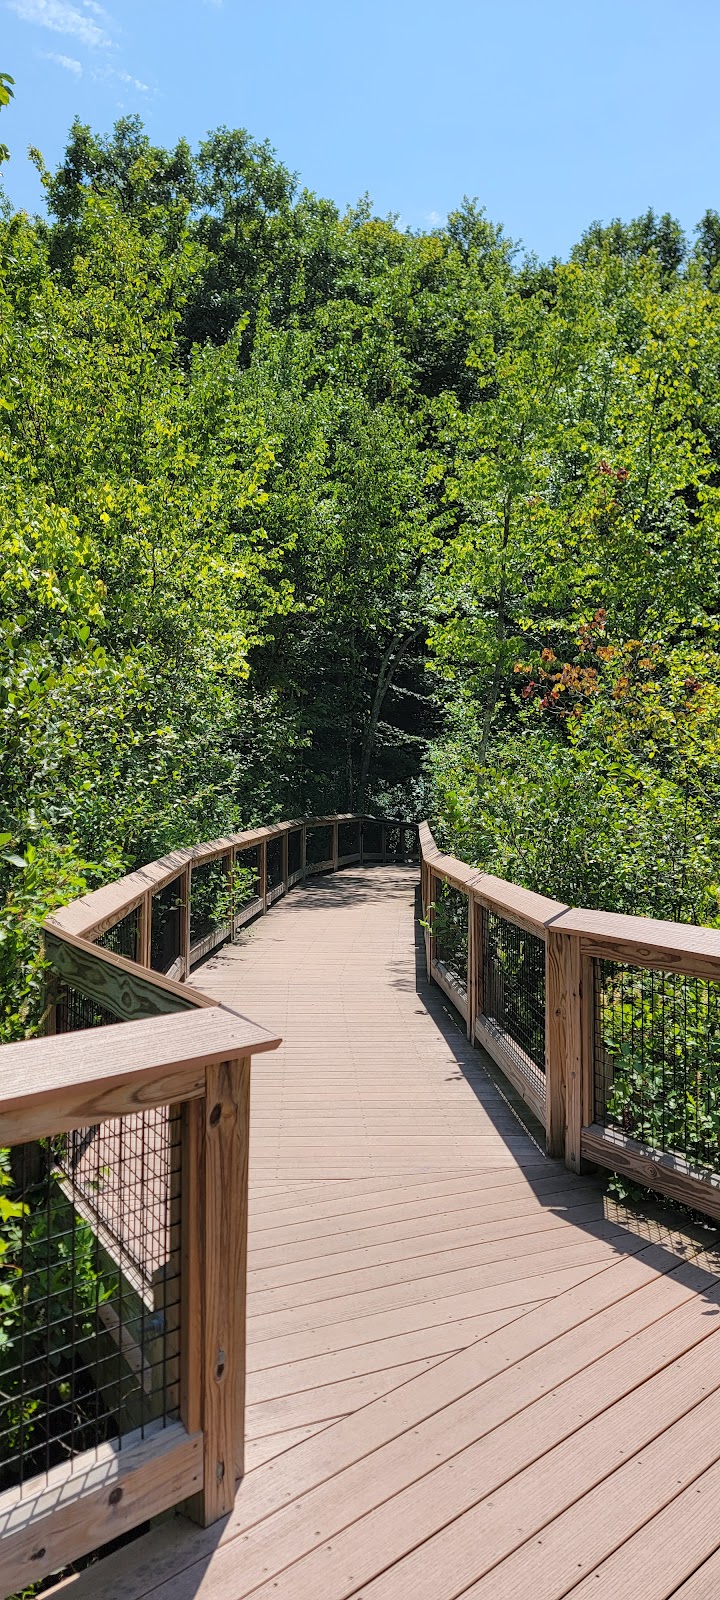 The Grounds and Trails at Dinosaur State Park | 400 West St, Rocky Hill, CT 06067 | Phone: (860) 529-5816